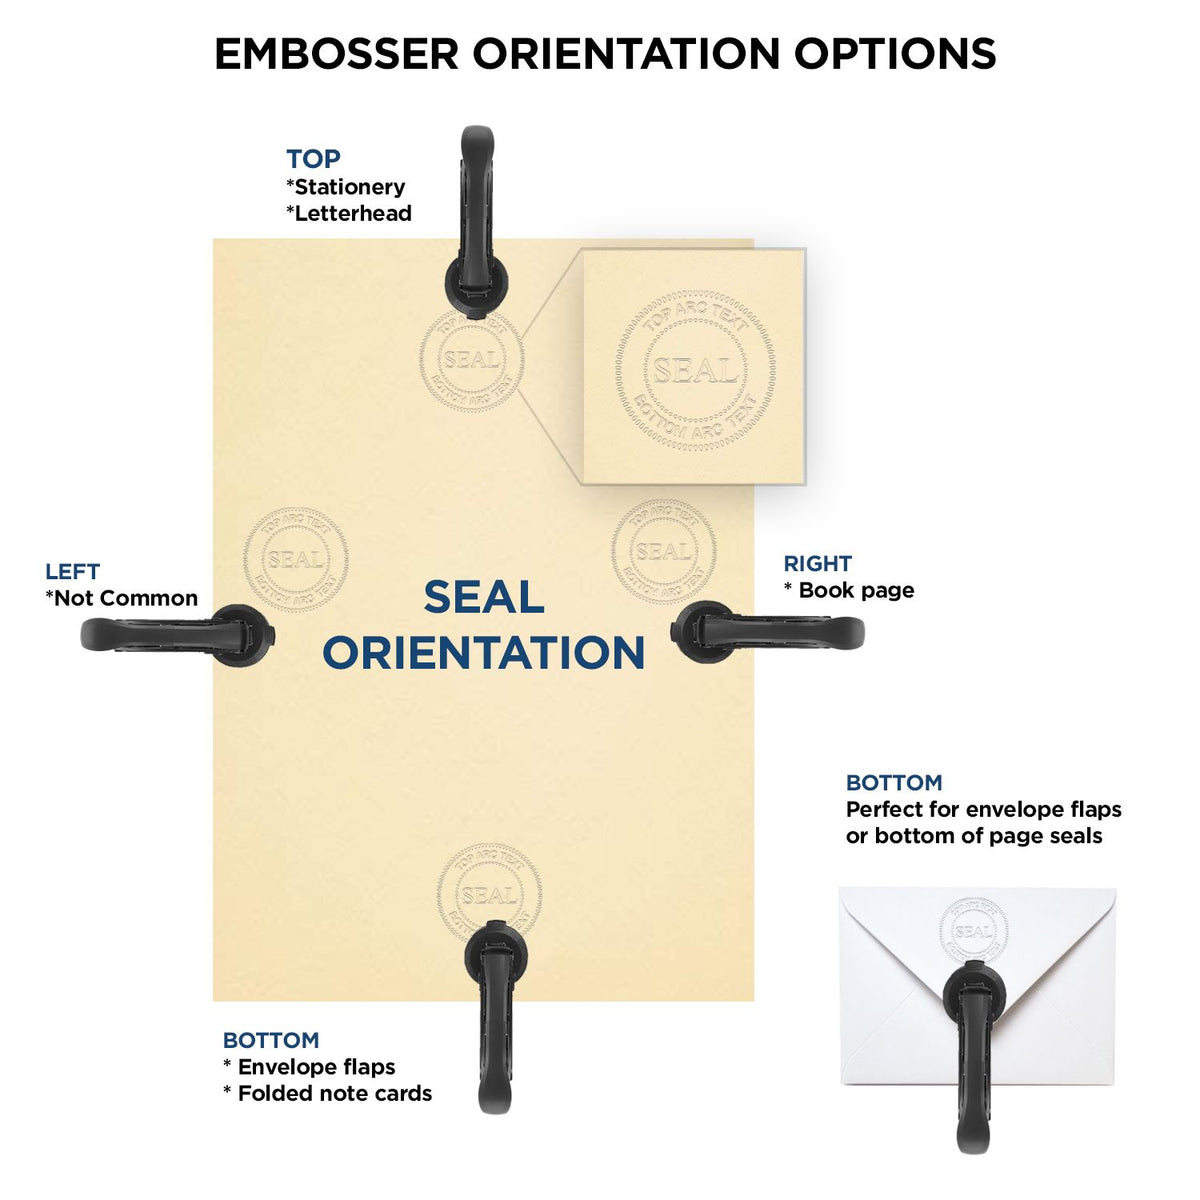 An infographic for the Handheld Massachusetts Land Surveyor Seal showing embosser orientation, this is showing examples of a top, bottom, right and left insert.